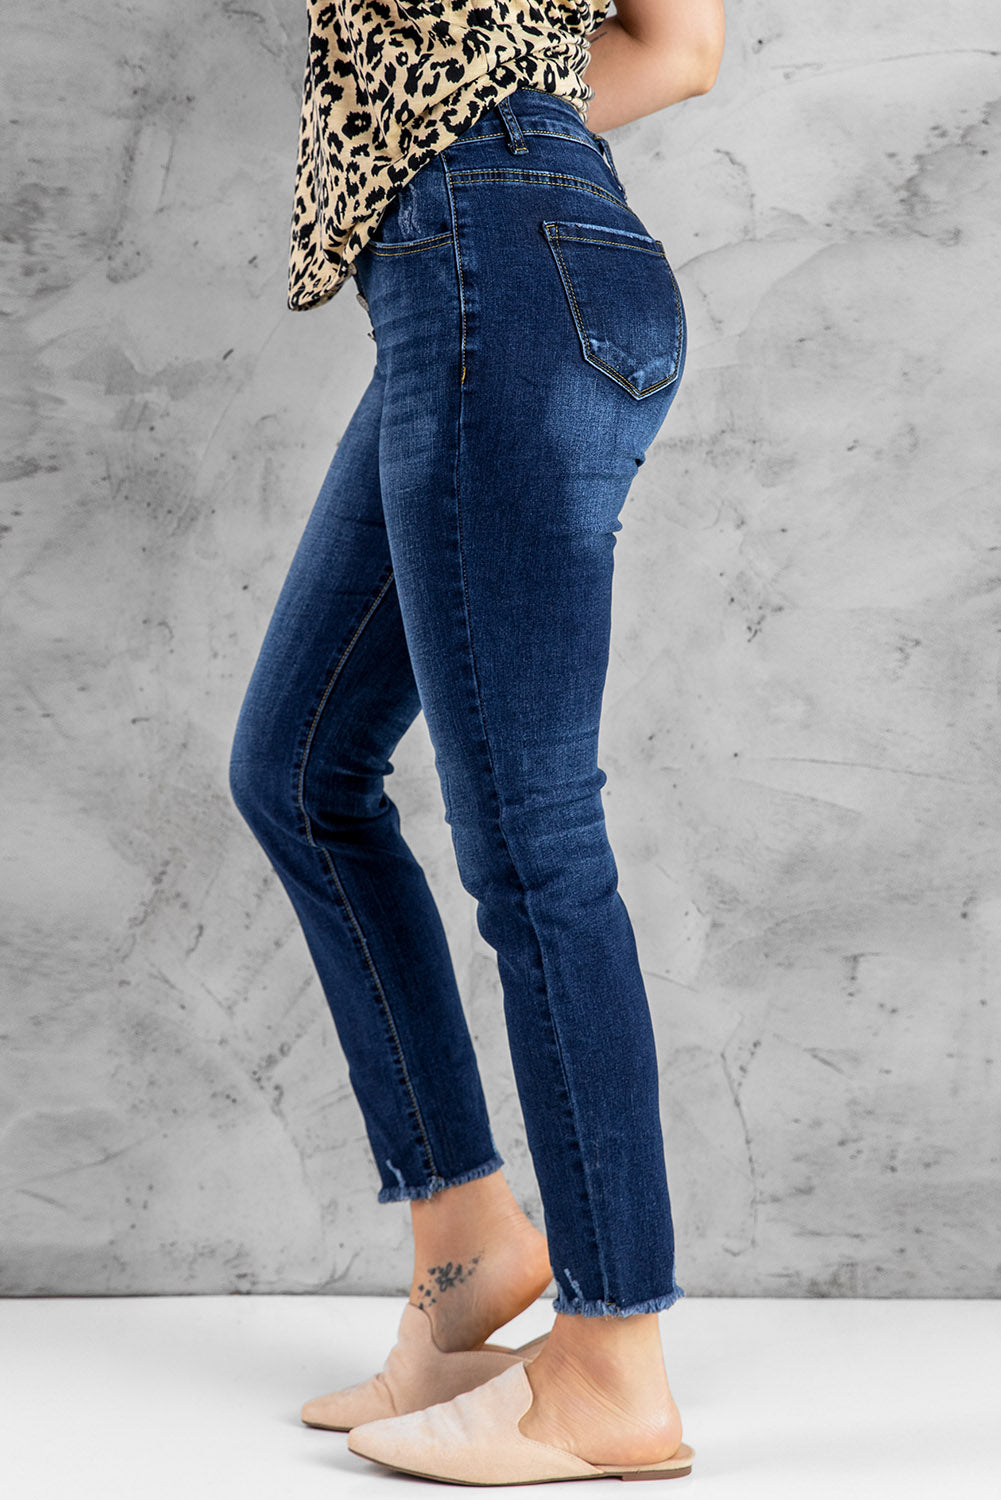 Fashion Dark Blue High Waisted Buttons Jeans